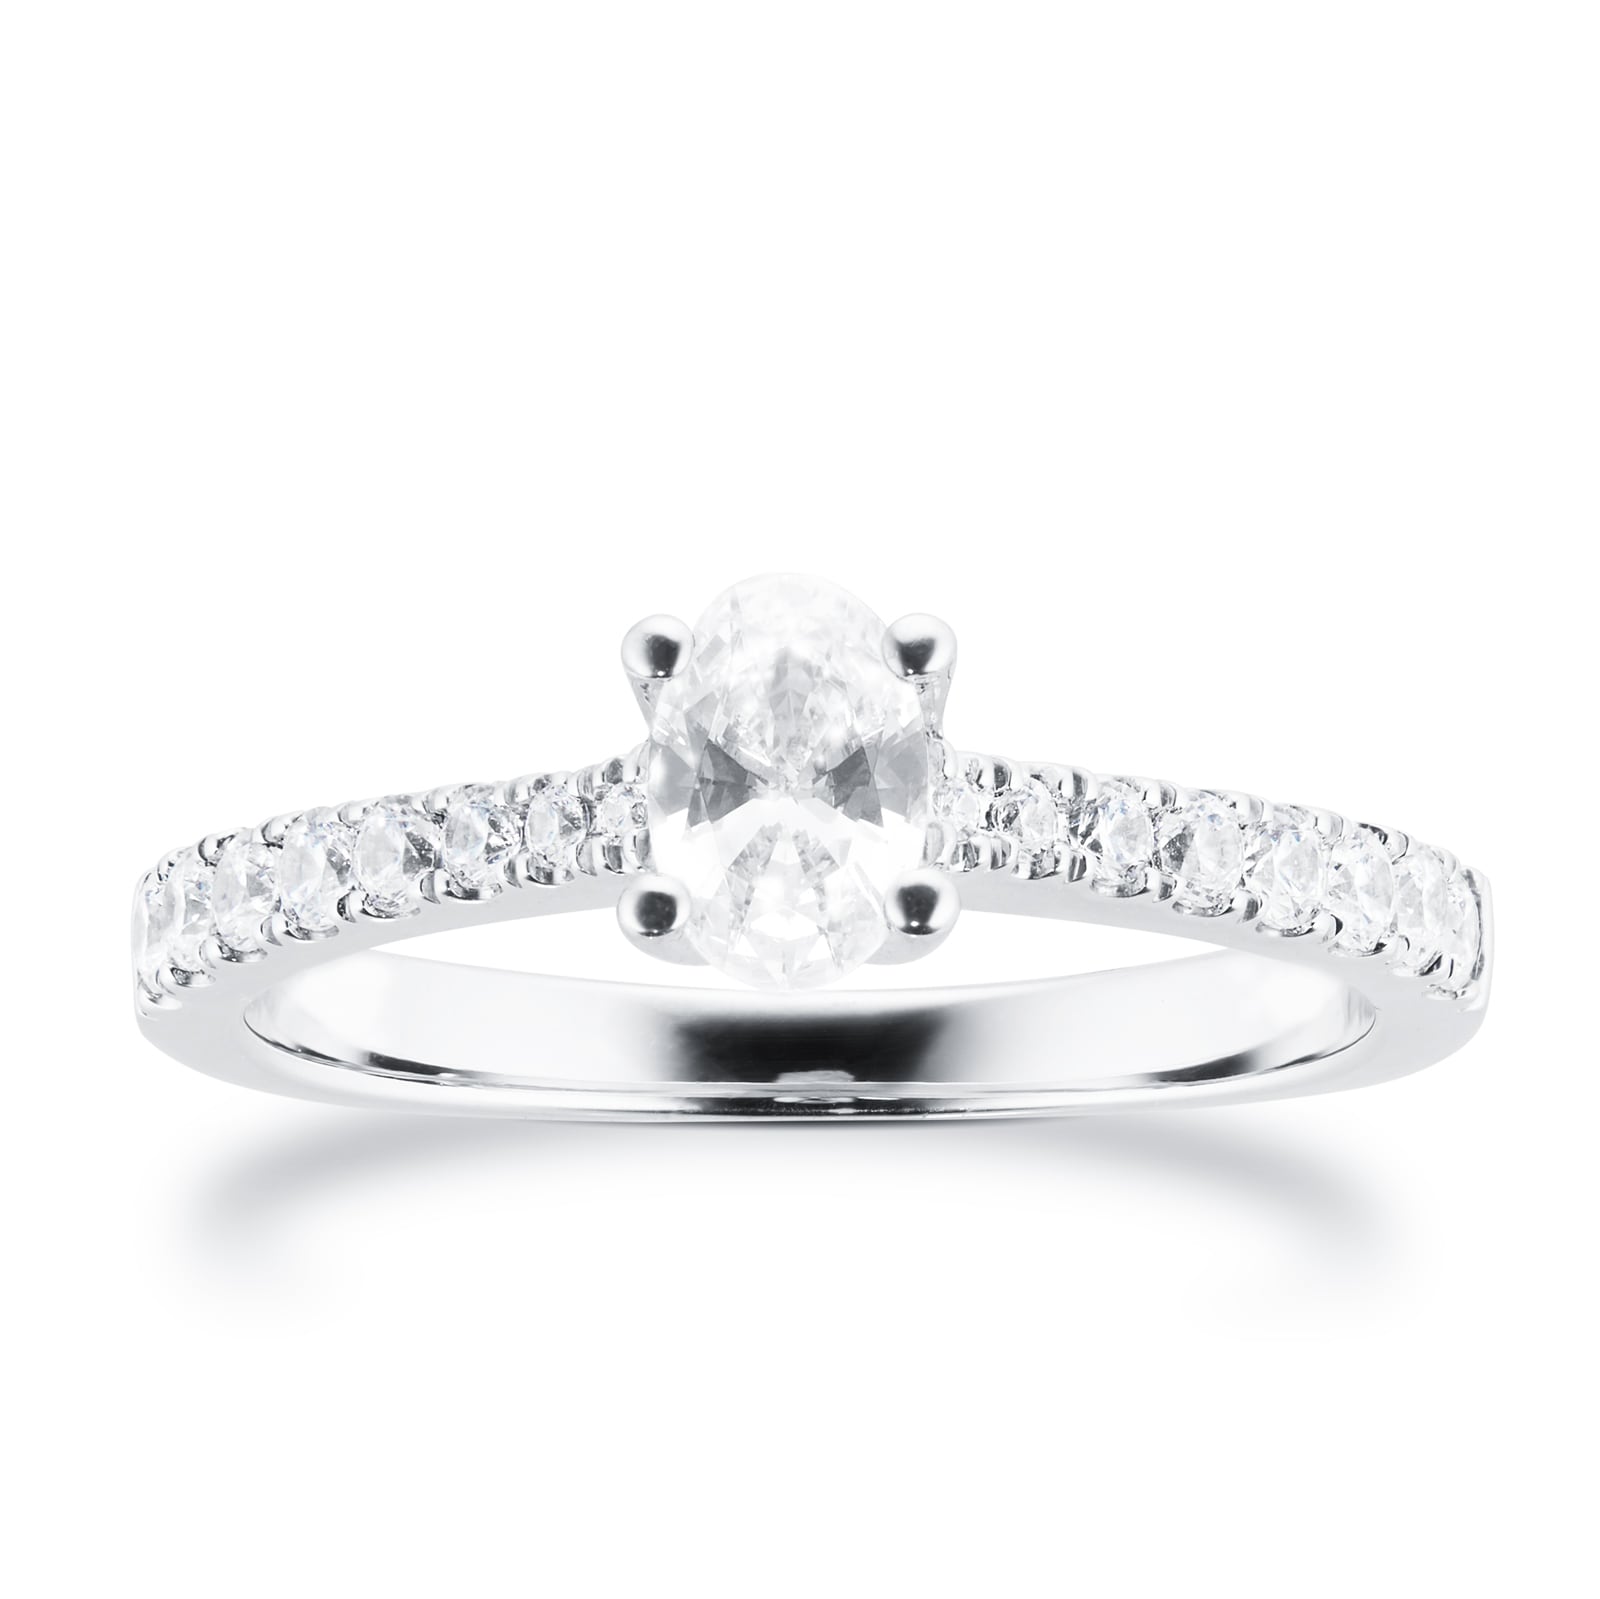 Platinum 0.70cttw Goldsmiths Brightest Diamond Oval Cut Solitaire Engagement Ring - Ring Size P